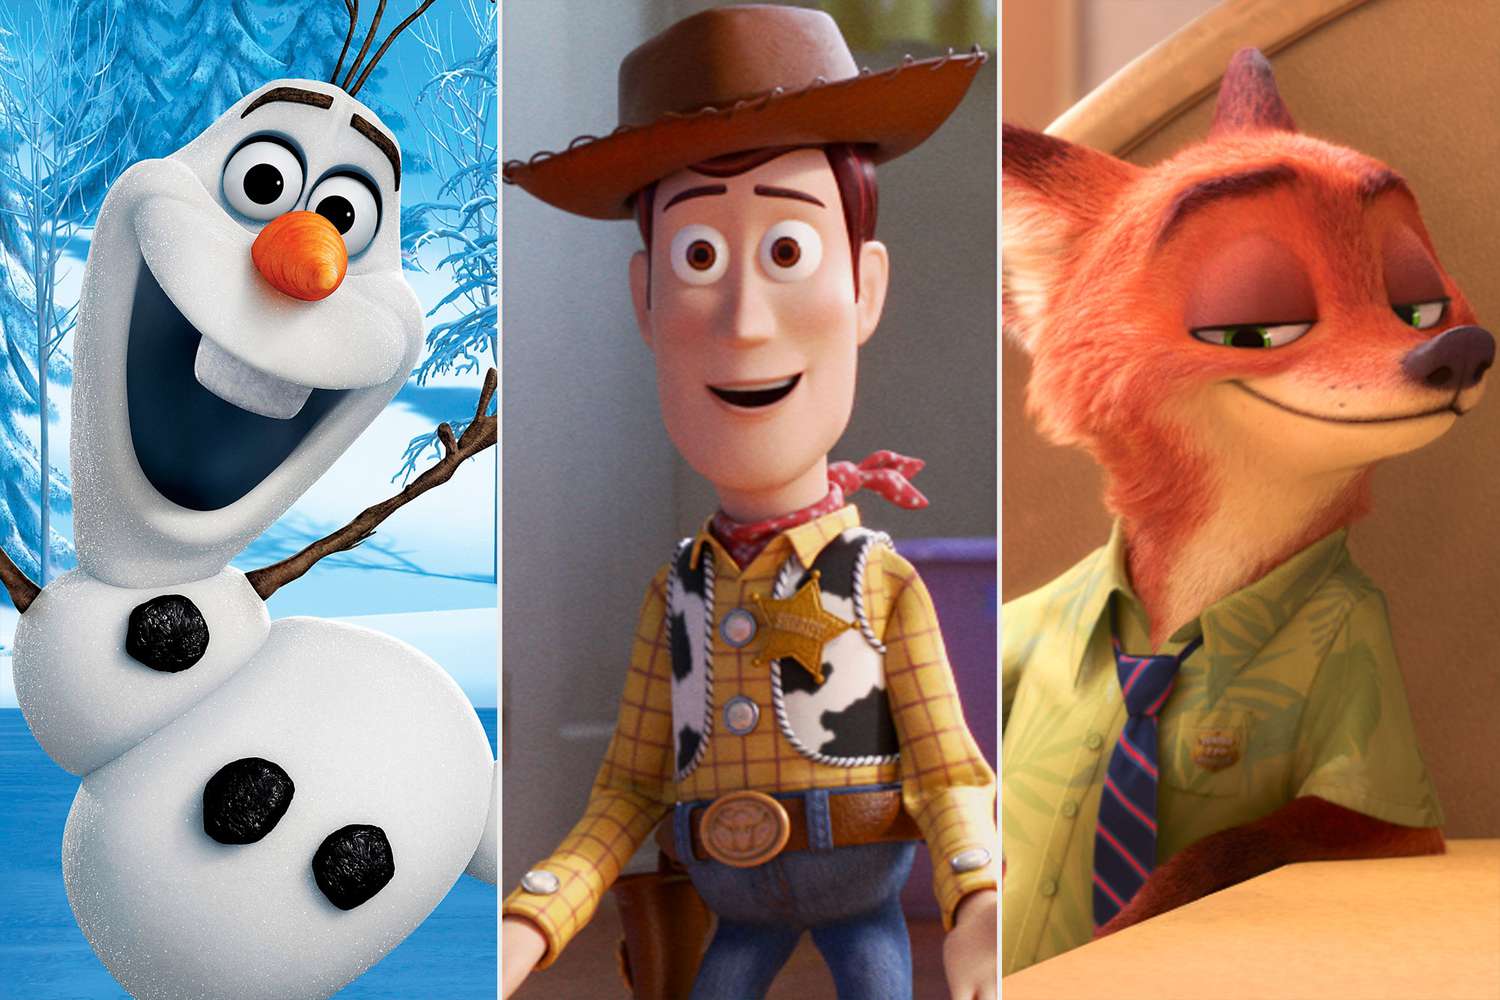 Disney is making new sequels to Frozen, Toy Story, and Zootopia 